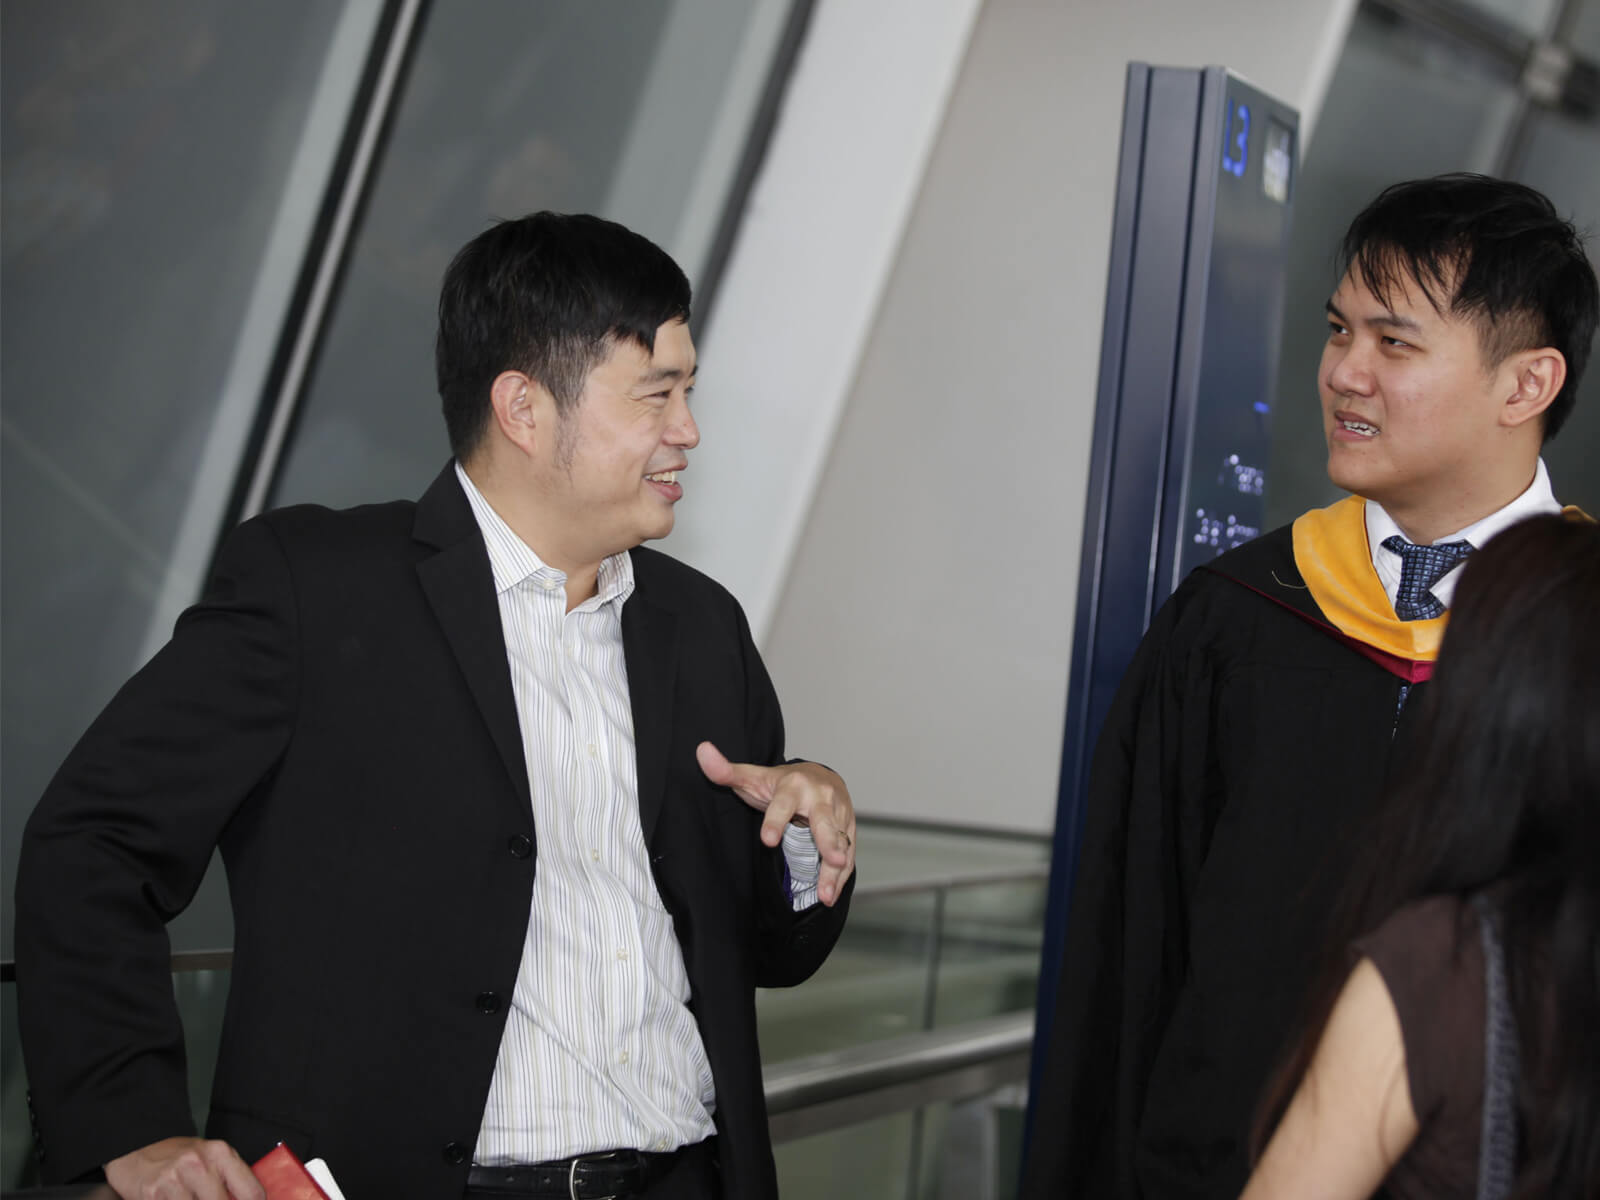 Dr. Edward Sim talks to a newly graduated DigiPen student who is wearing a cap and gown